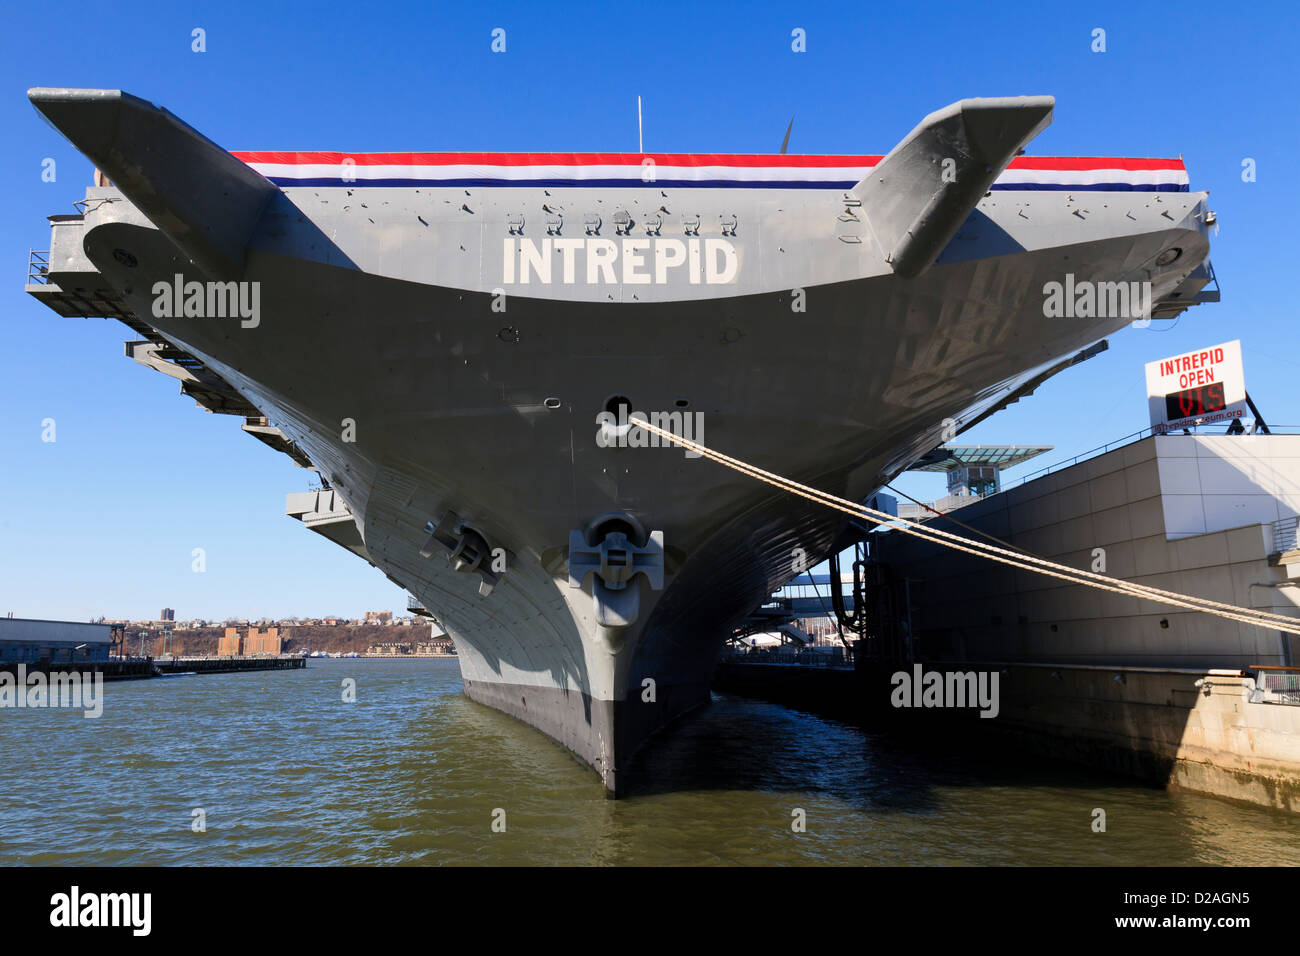 USS Intrepid is one aircraft built during WW II for the US Navy and it's in exhibition along with the Space shuttle Entreprise. Stock Photo